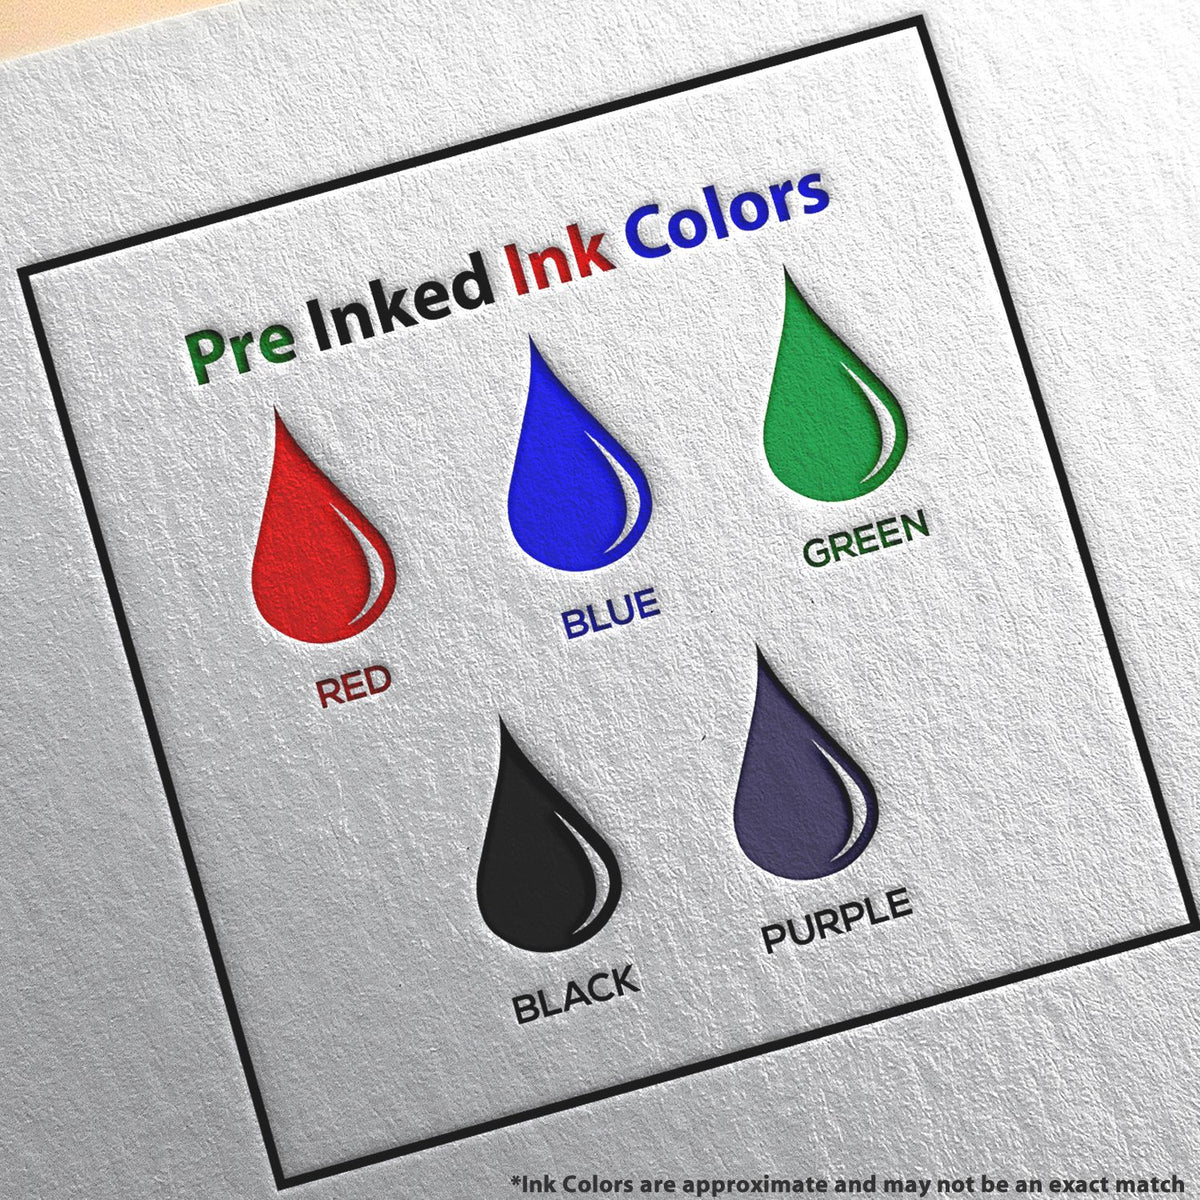 A picture showing the different ink colors or hues available for the Premium MaxLight Pre-Inked Louisiana Landscape Architectural Stamp product.